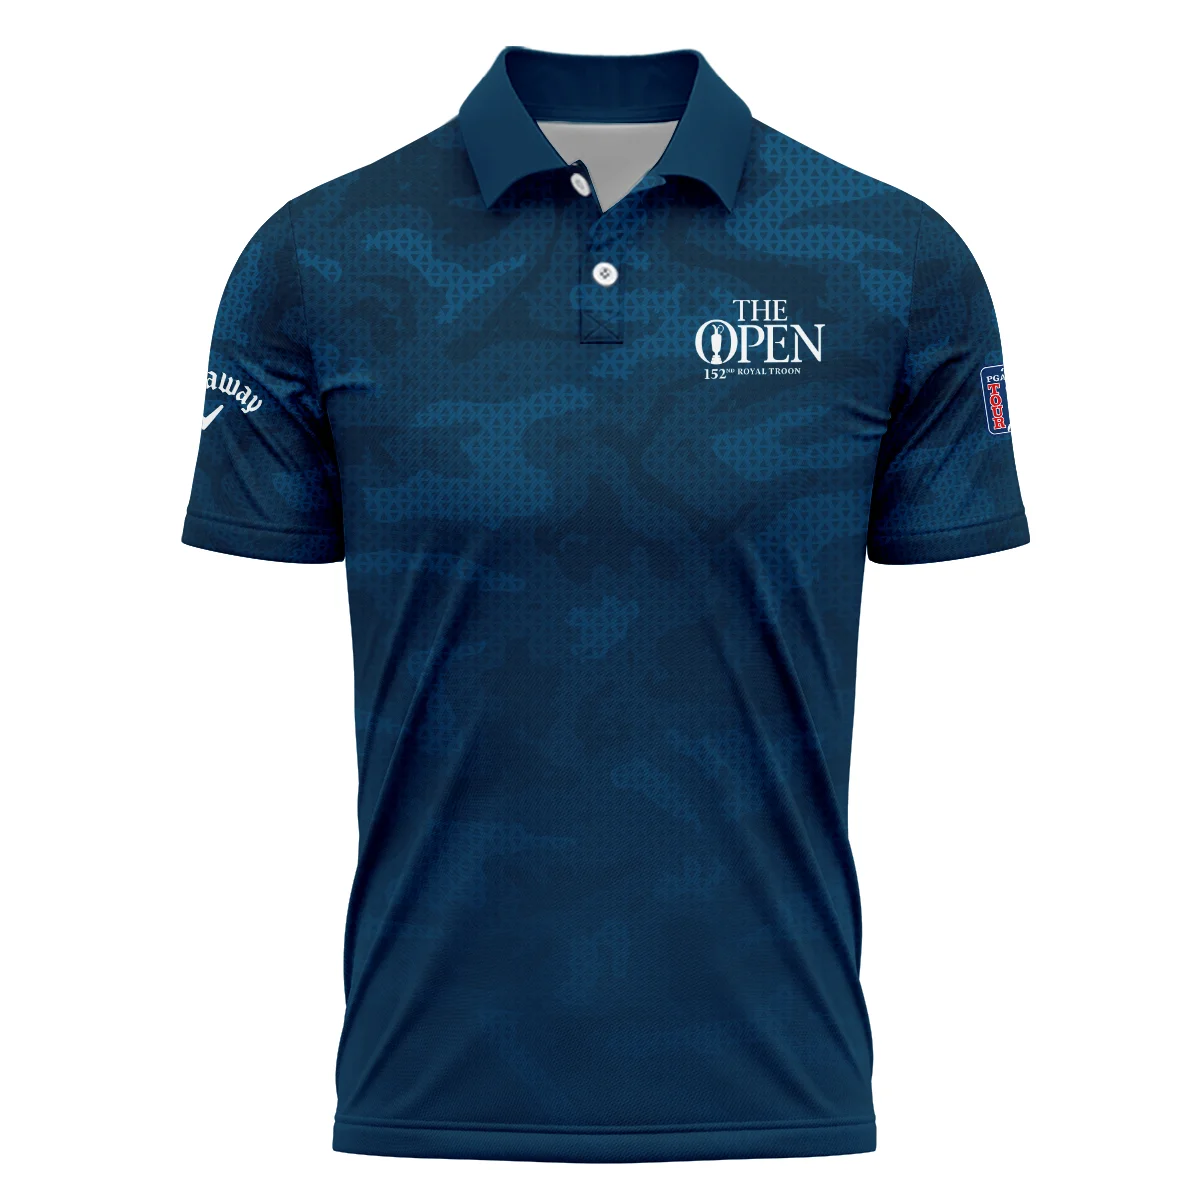 Callaway 152nd Open Championship Dark Blue Abstract Background Zipper Polo Shirt All Over Prints HOTOP260624A02CLWZPL